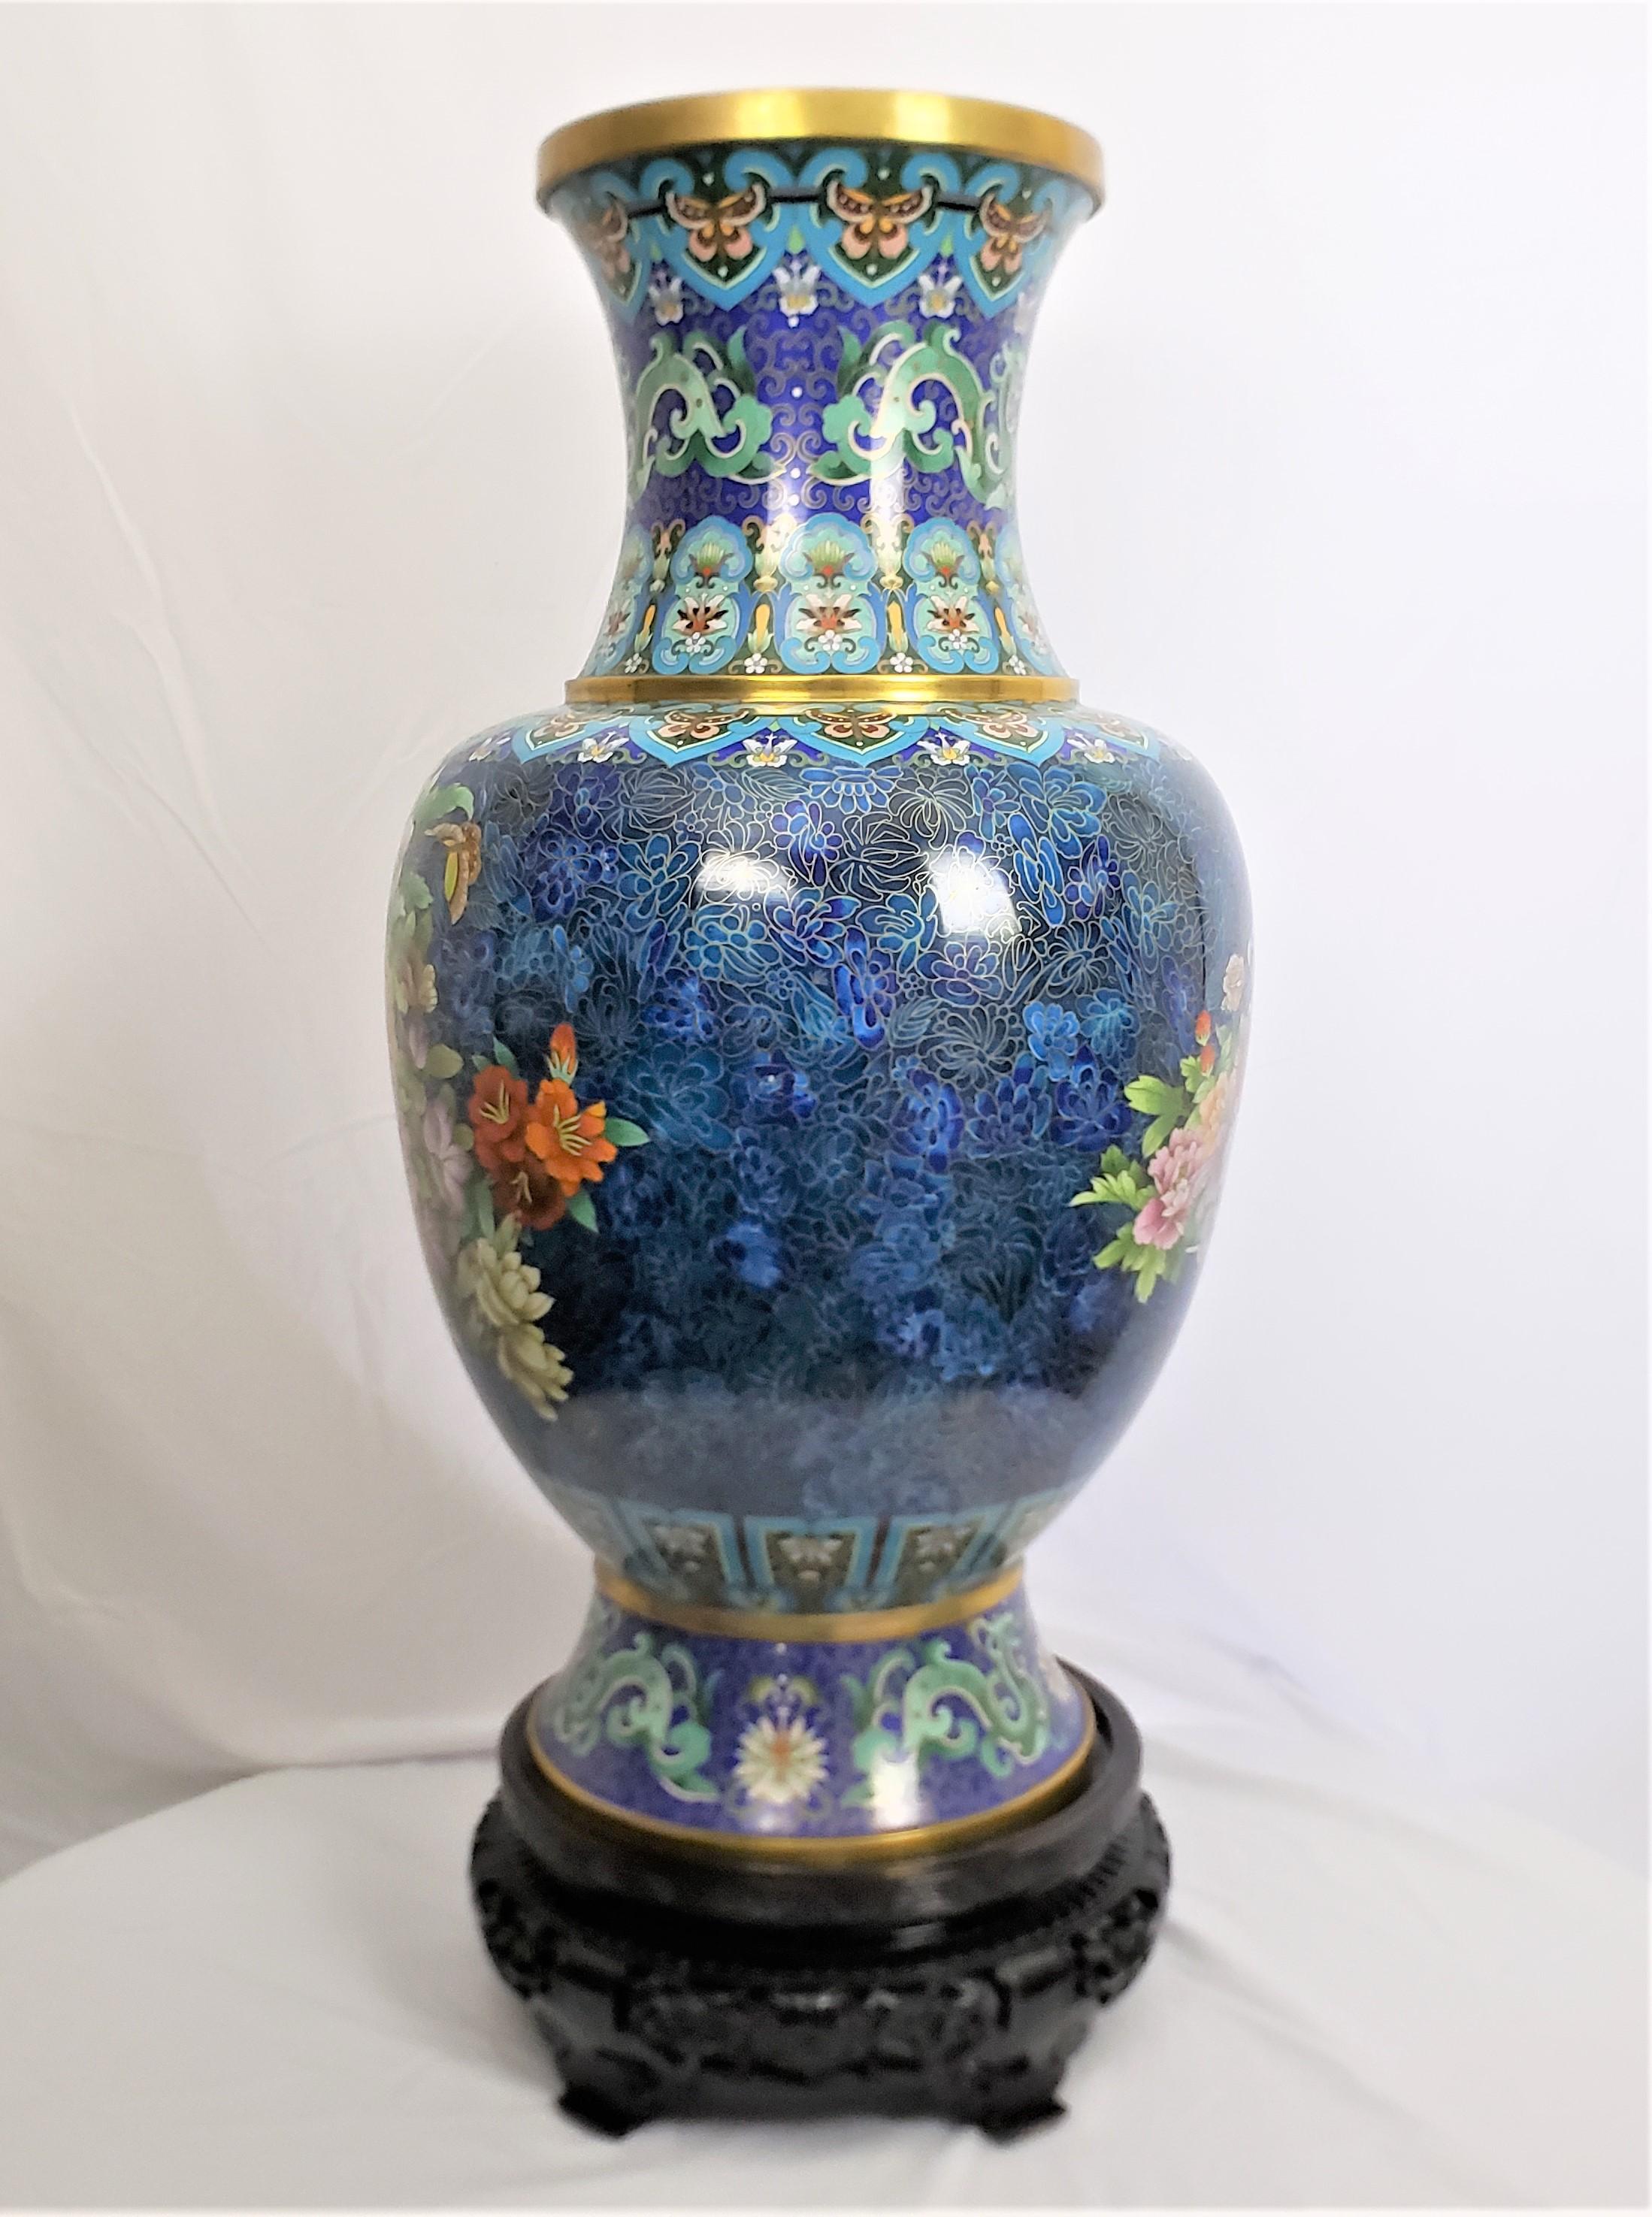 Hand-Crafted Huge Mid 20th Century Chinese Cloisonne Vase with Ornate Floral Decoration